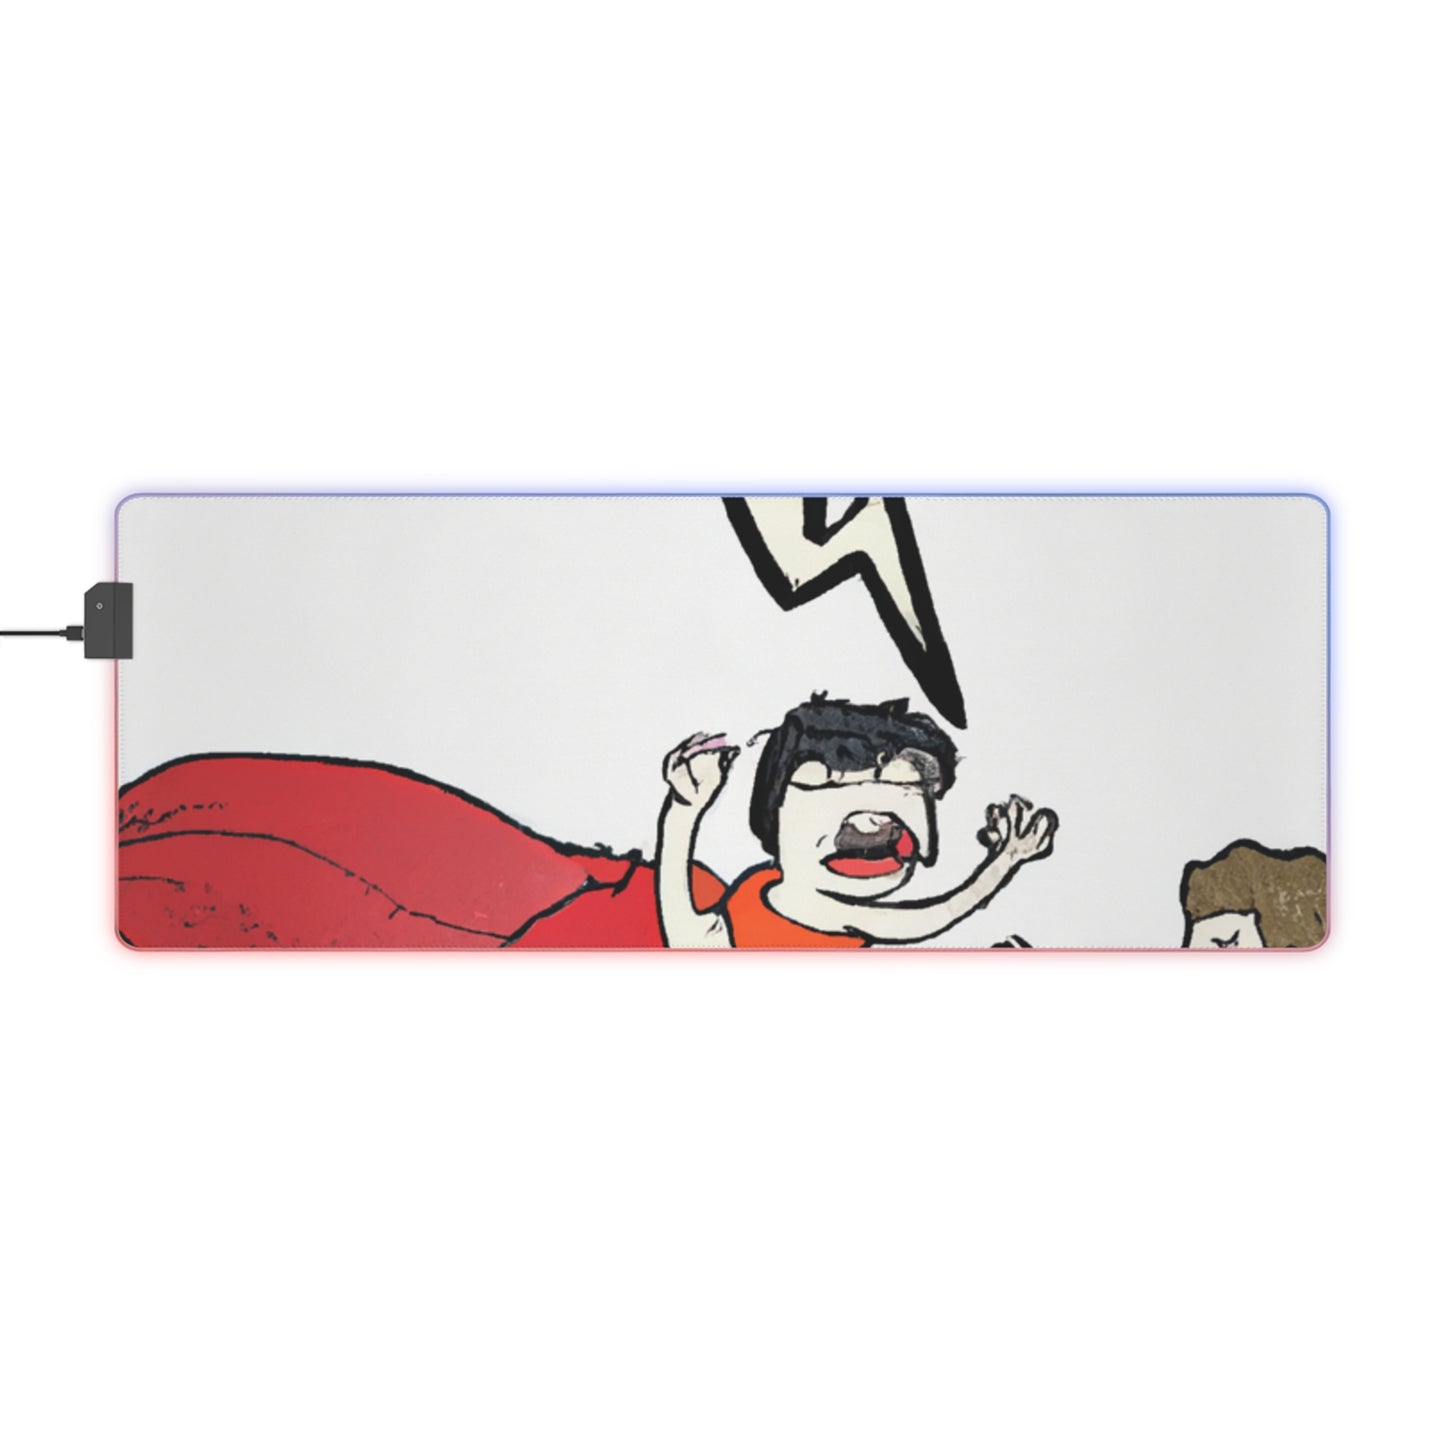 Rocky Rocketman - Comic Book Collector LED Light Up Gaming Mouse Pad